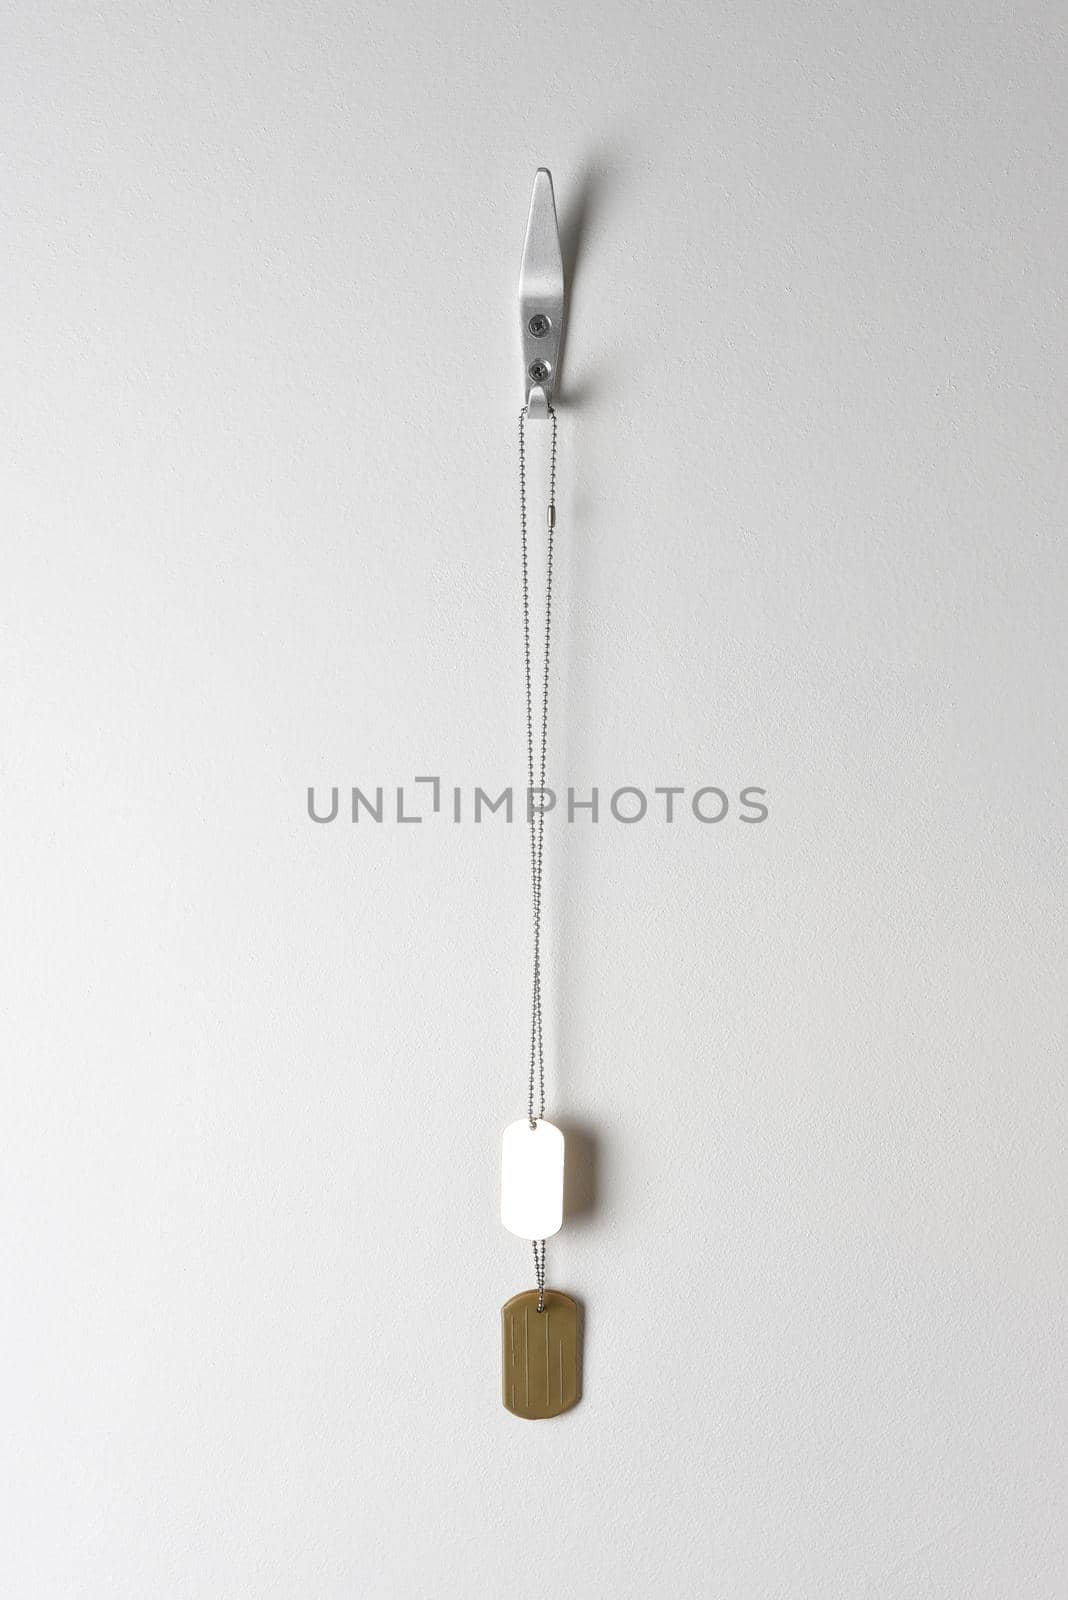 A single set of military dog tags hanging from a hook on a blank wall. by sCukrov